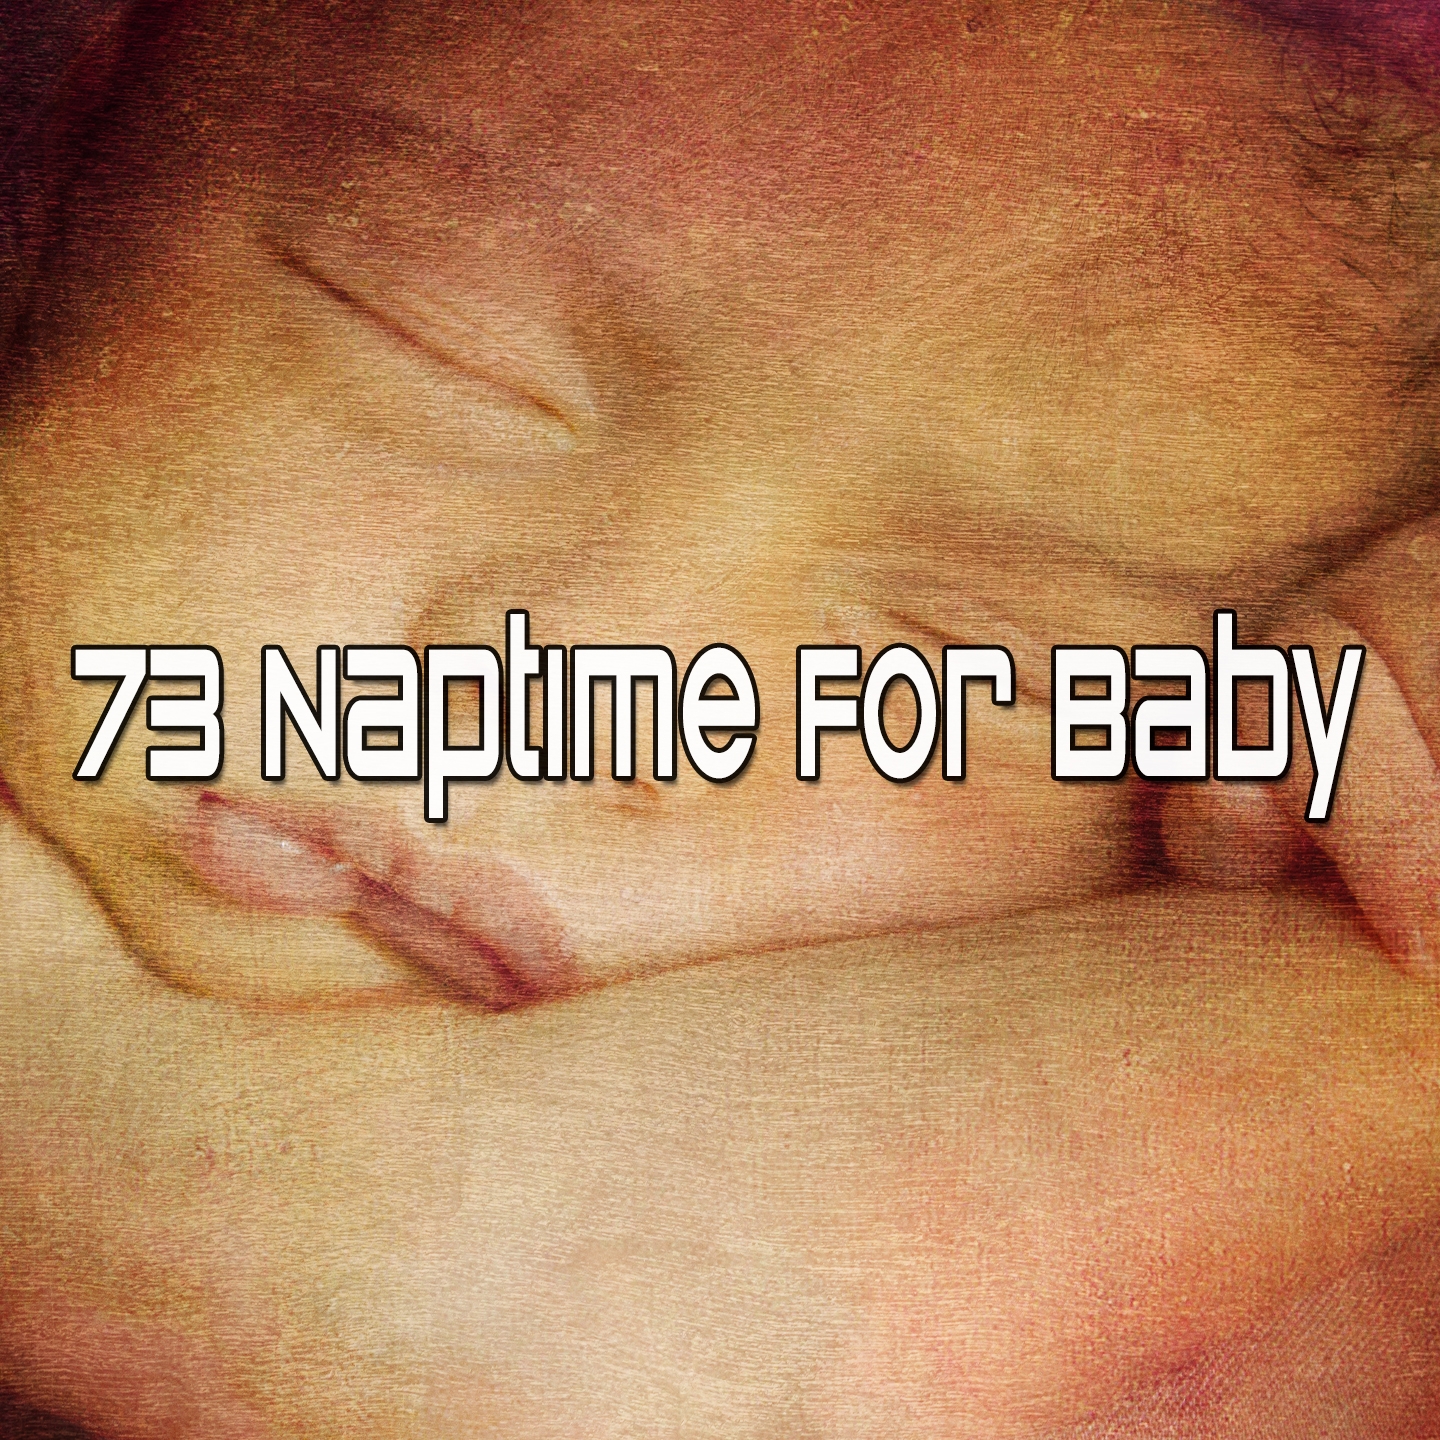 73 Naptime For Baby